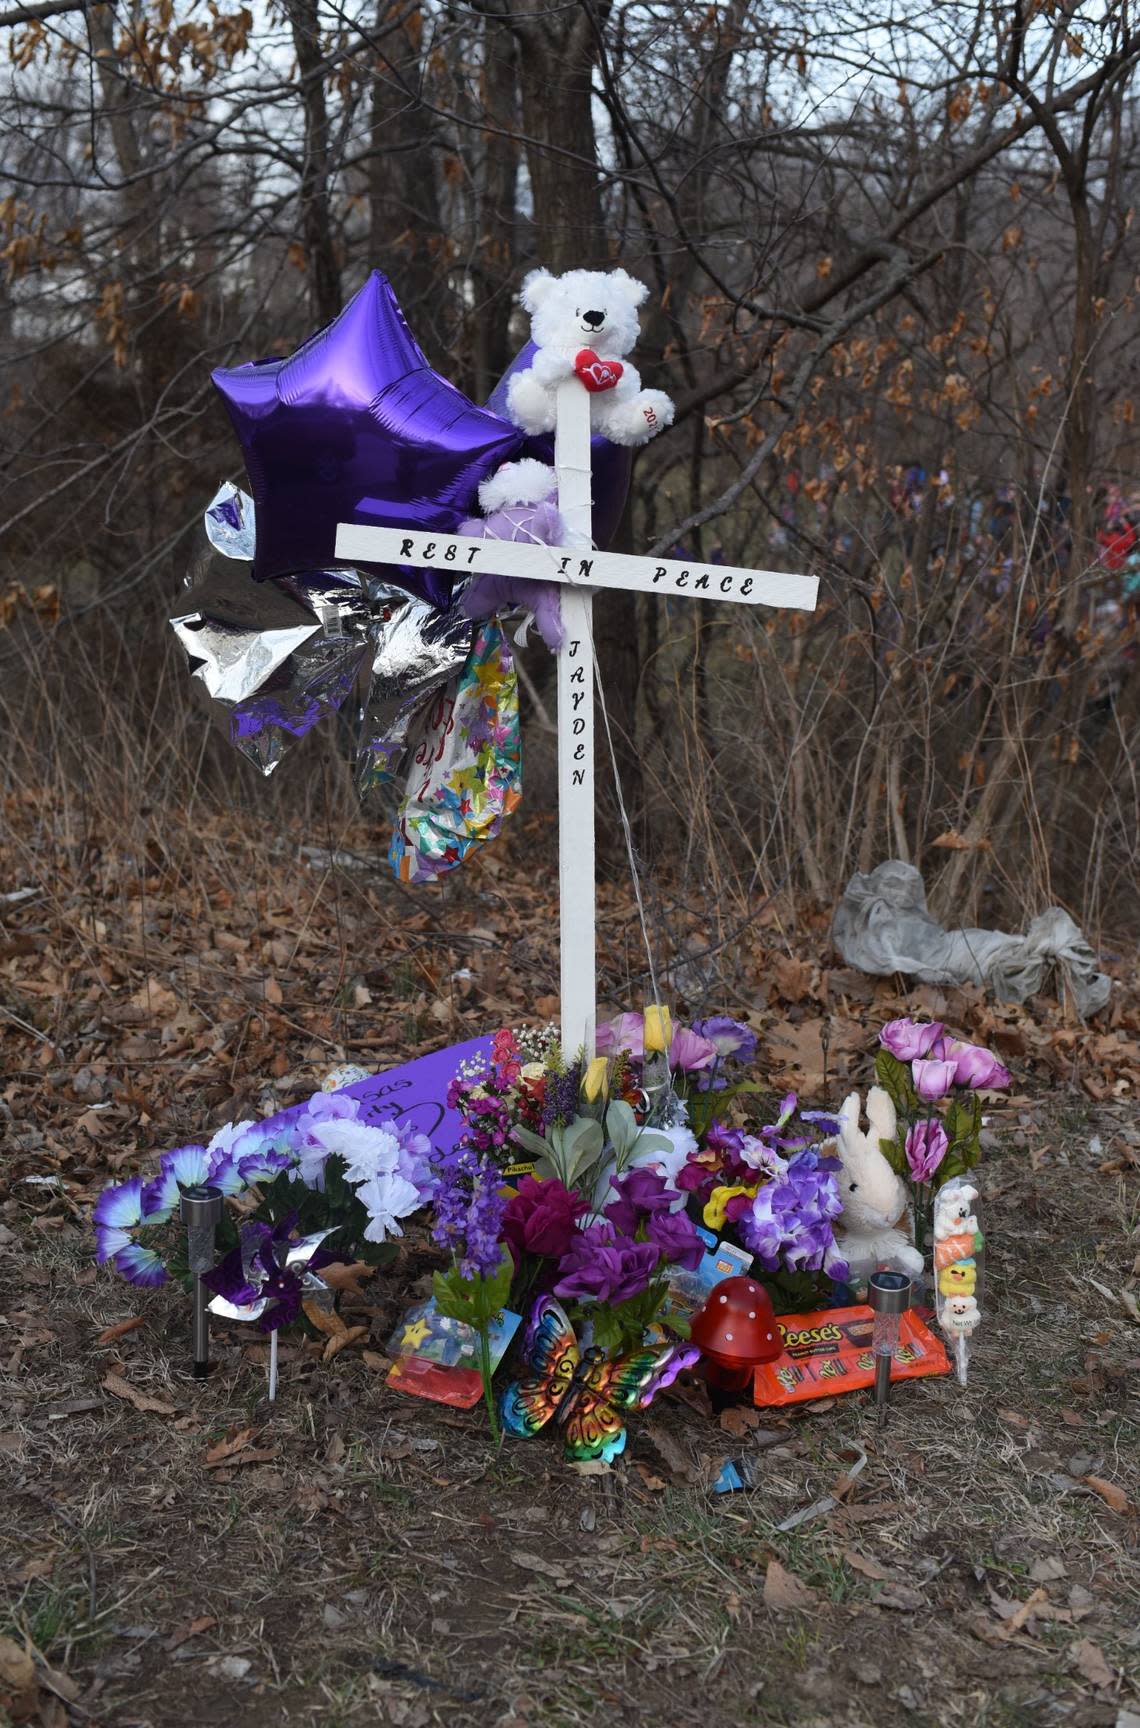 A cross sits surrounded by tributes to Jayden Robker, a missing Kansas City 13-year-old whose body was found Friday in a pond in Gladstone. Robker had been missing since early February Bill Lukitsch